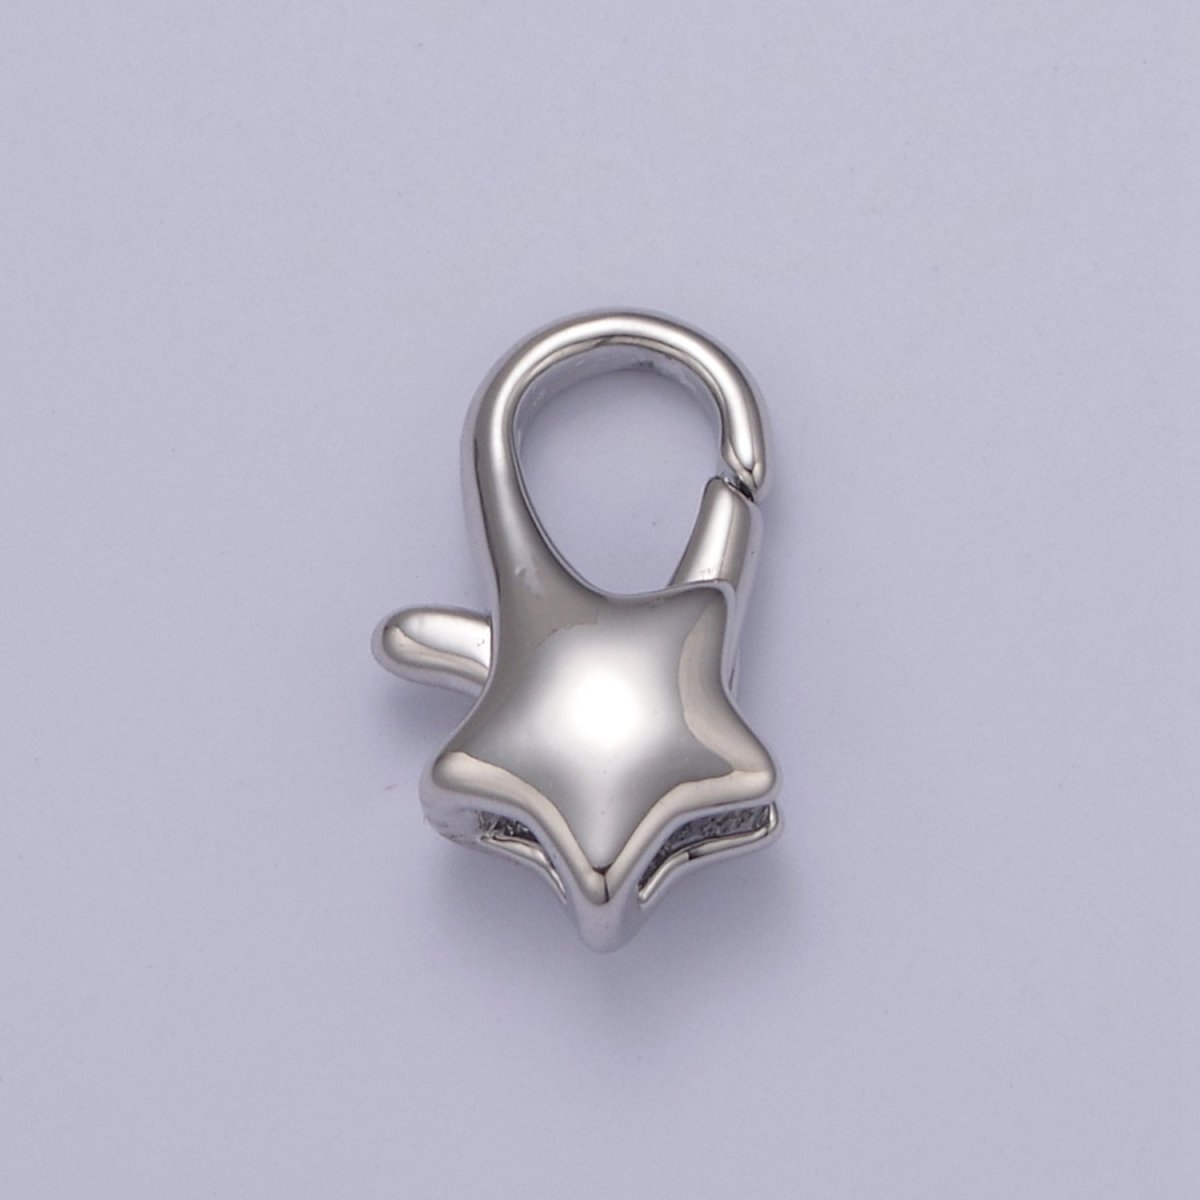 Wholesale Gold Filled Star Lobster Clasp Tiny Star Trigger Clasp – Celestial Lobster Claw for Jewelry Making Supplies L-654 L-655 - DLUXCA